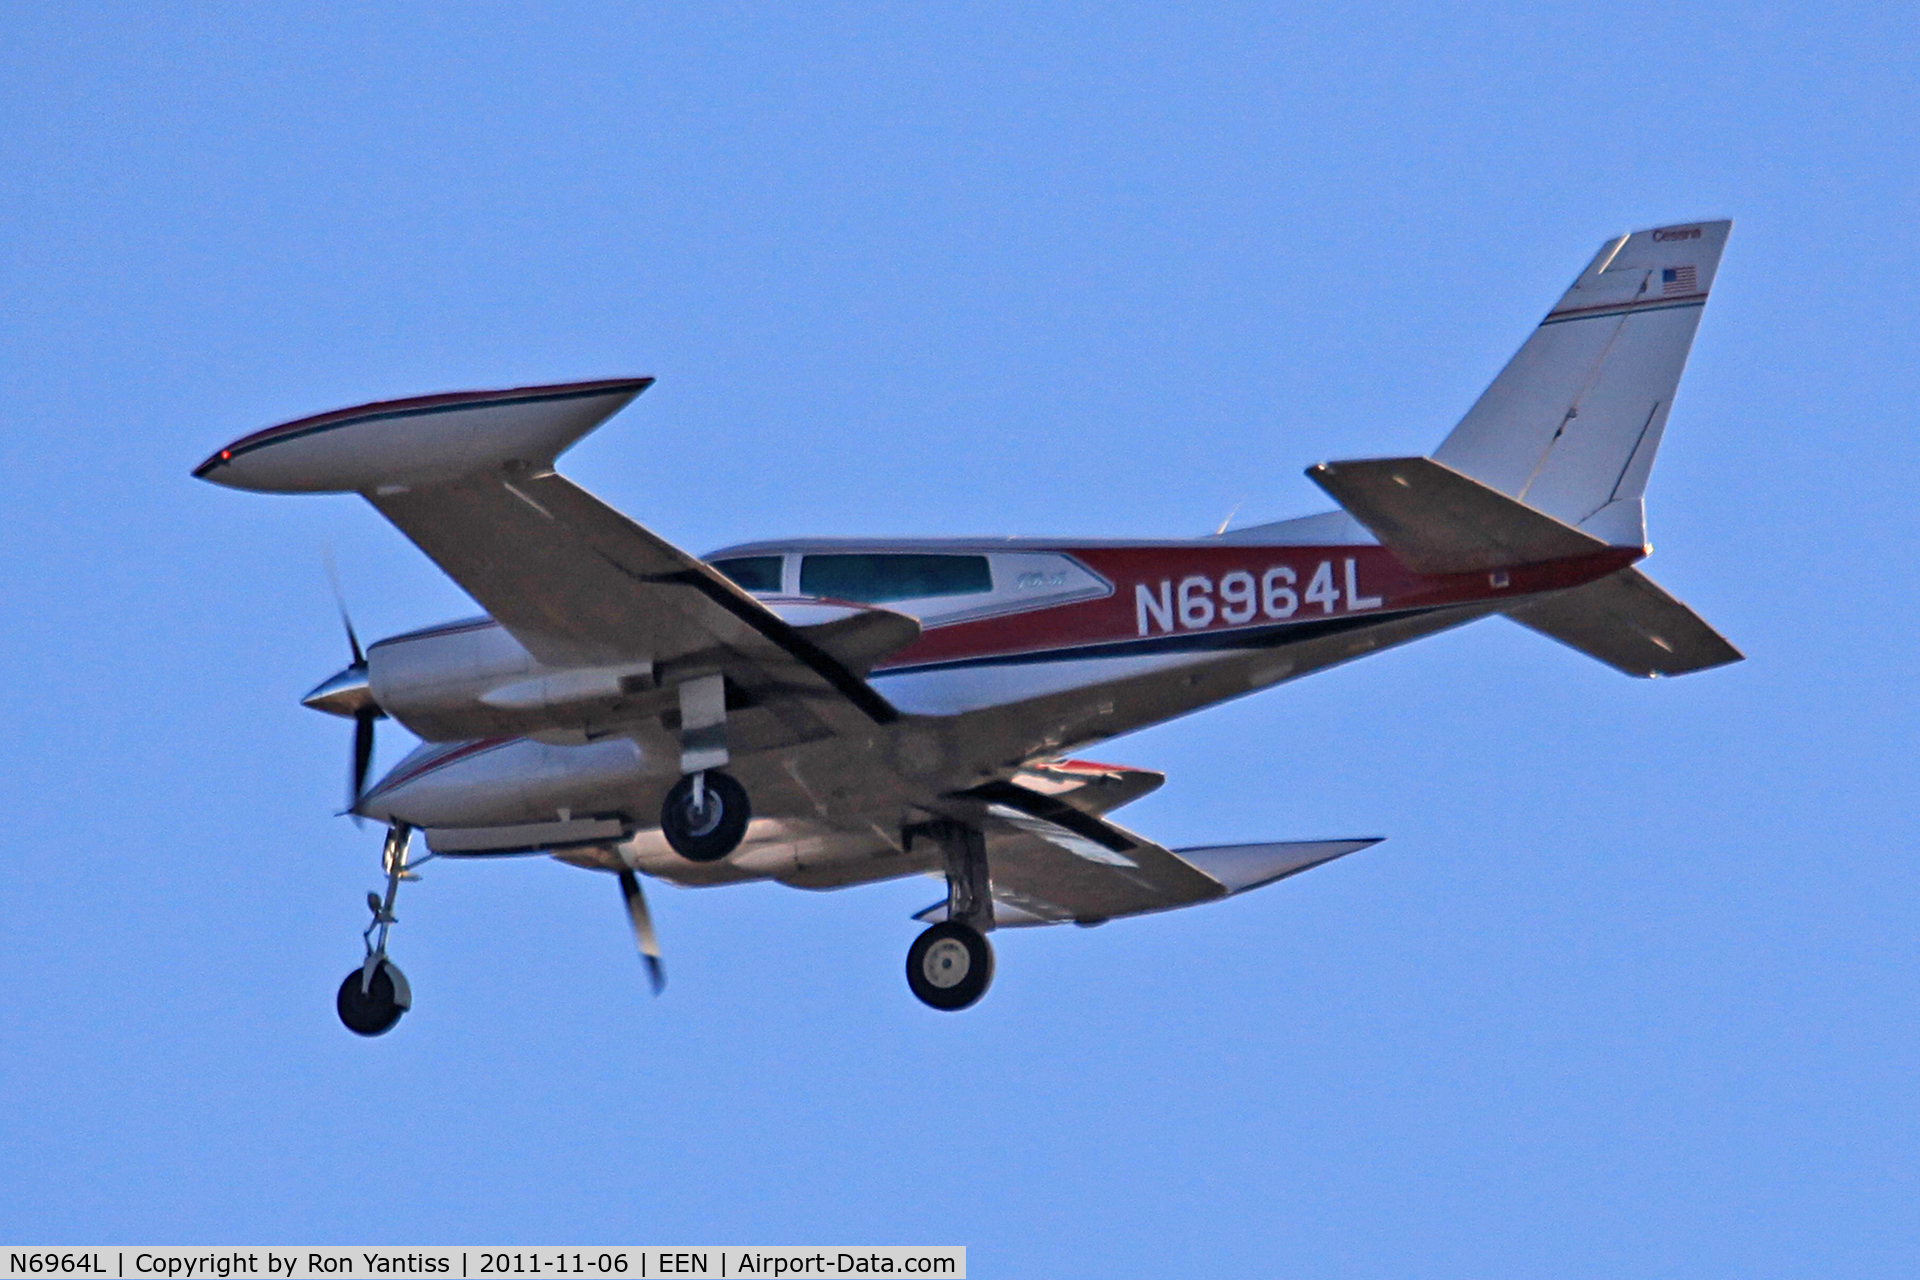 N6964L, 1966 Cessna 310K C/N 310K0064, Final approach straight in from the south, runway 02, Dillant-Hopkins Airport, Keene, NH